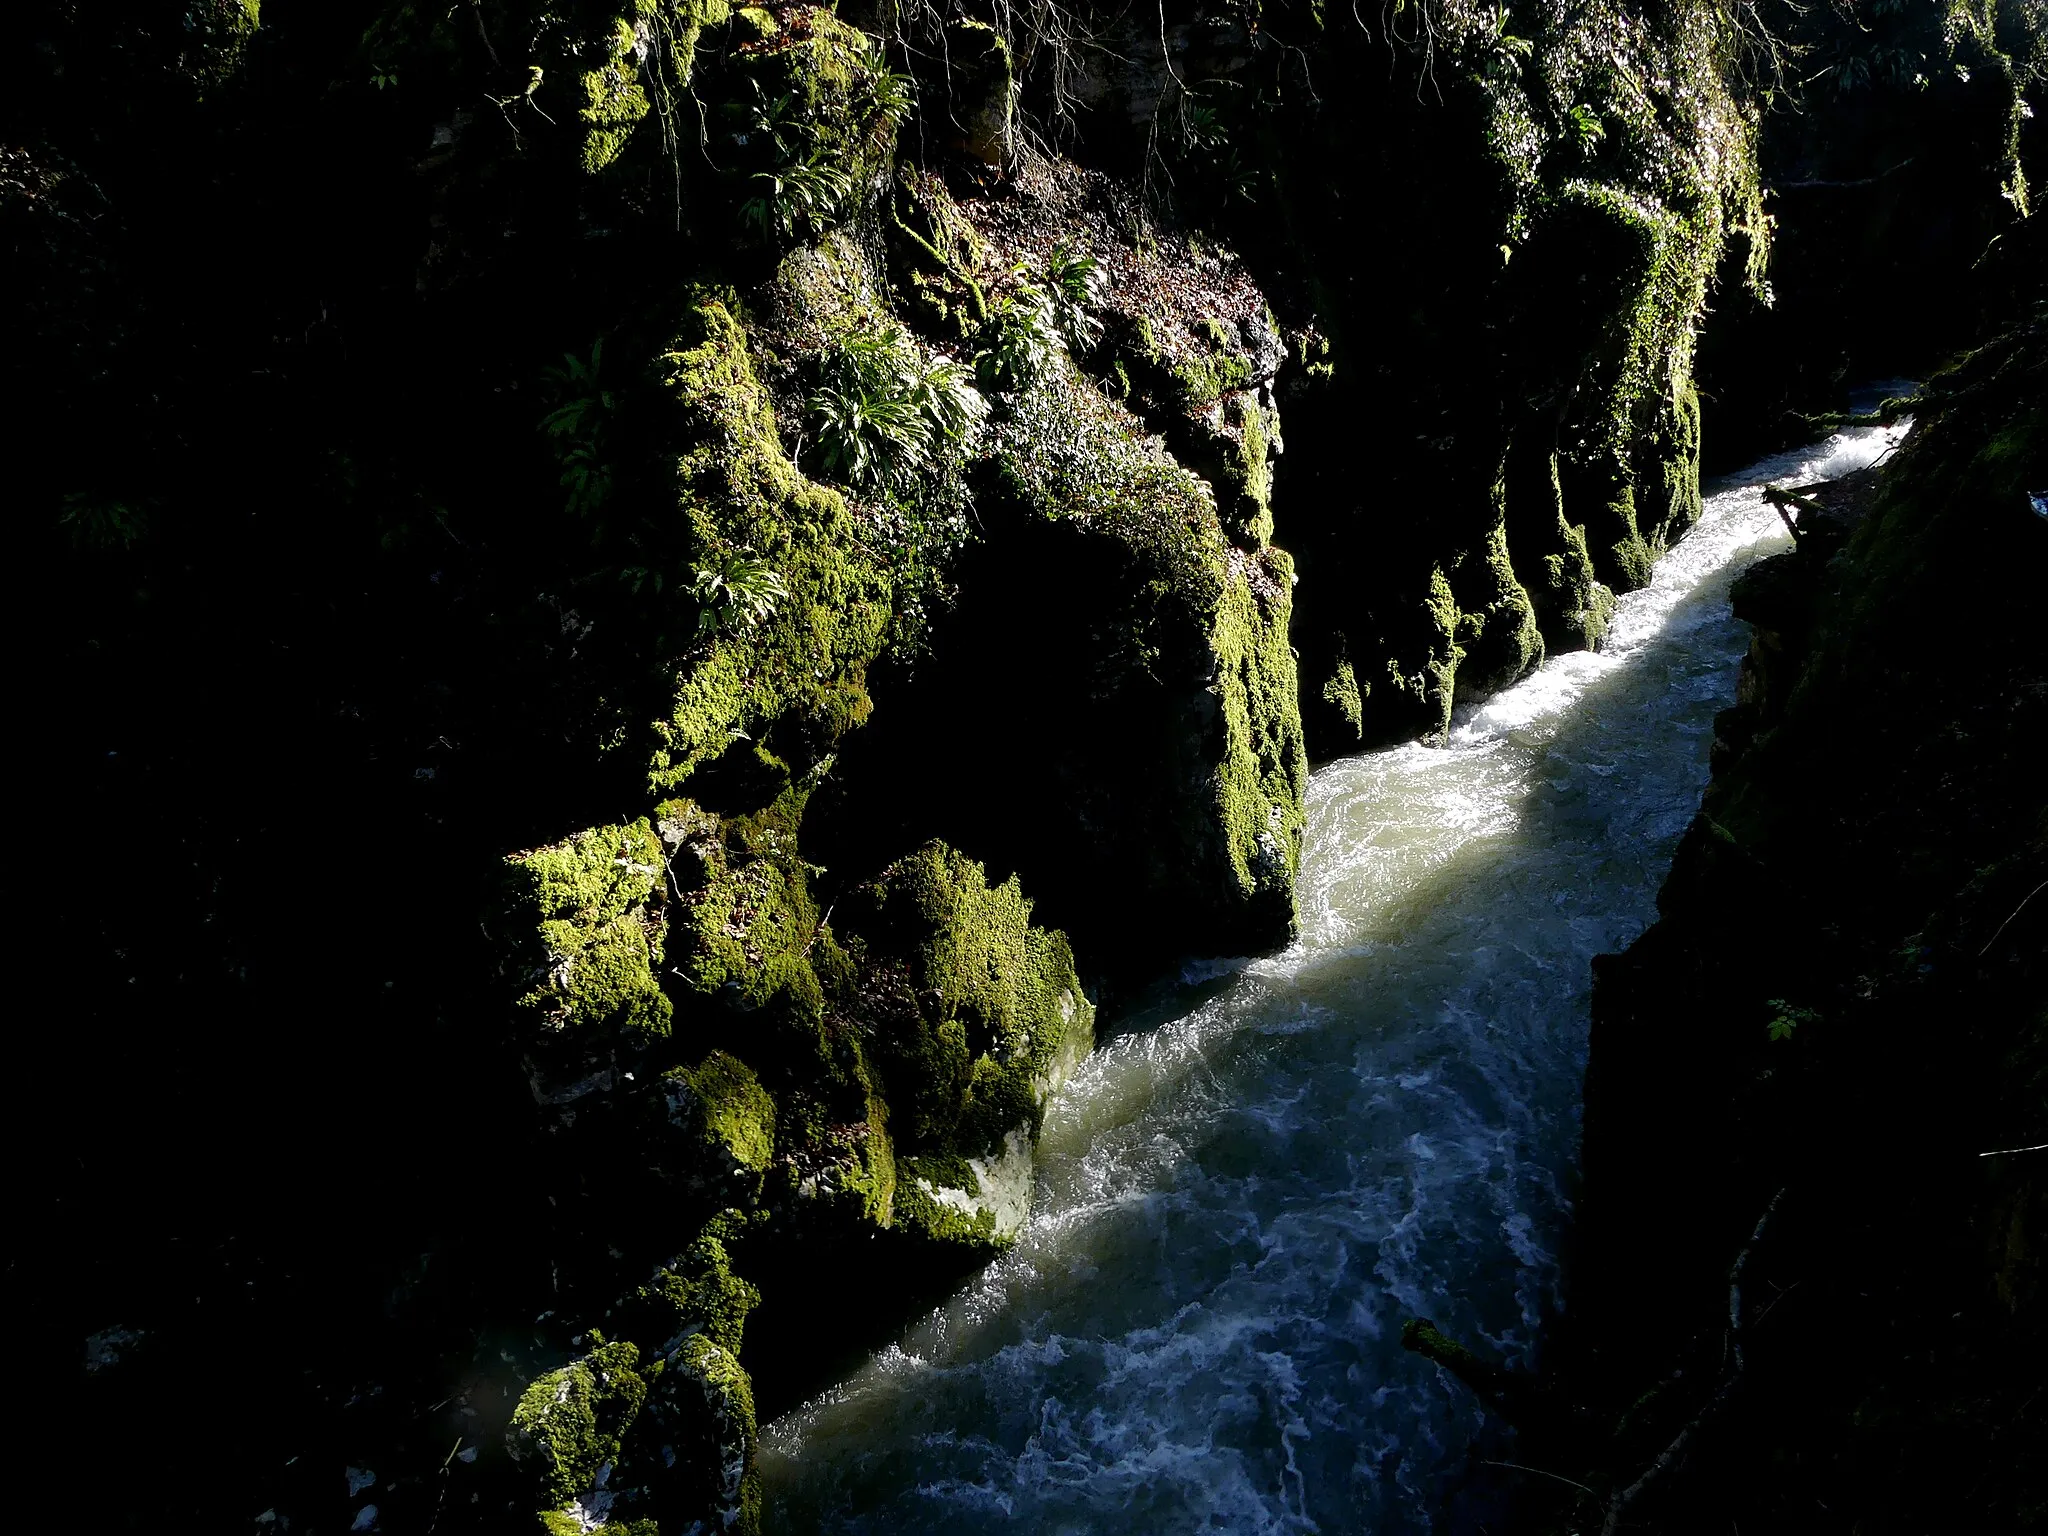 Photo showing: Sight, in winter, of Sierroz river gorge in Grésy-sur-Aix near Aix-les-Bains, Savoie, France.